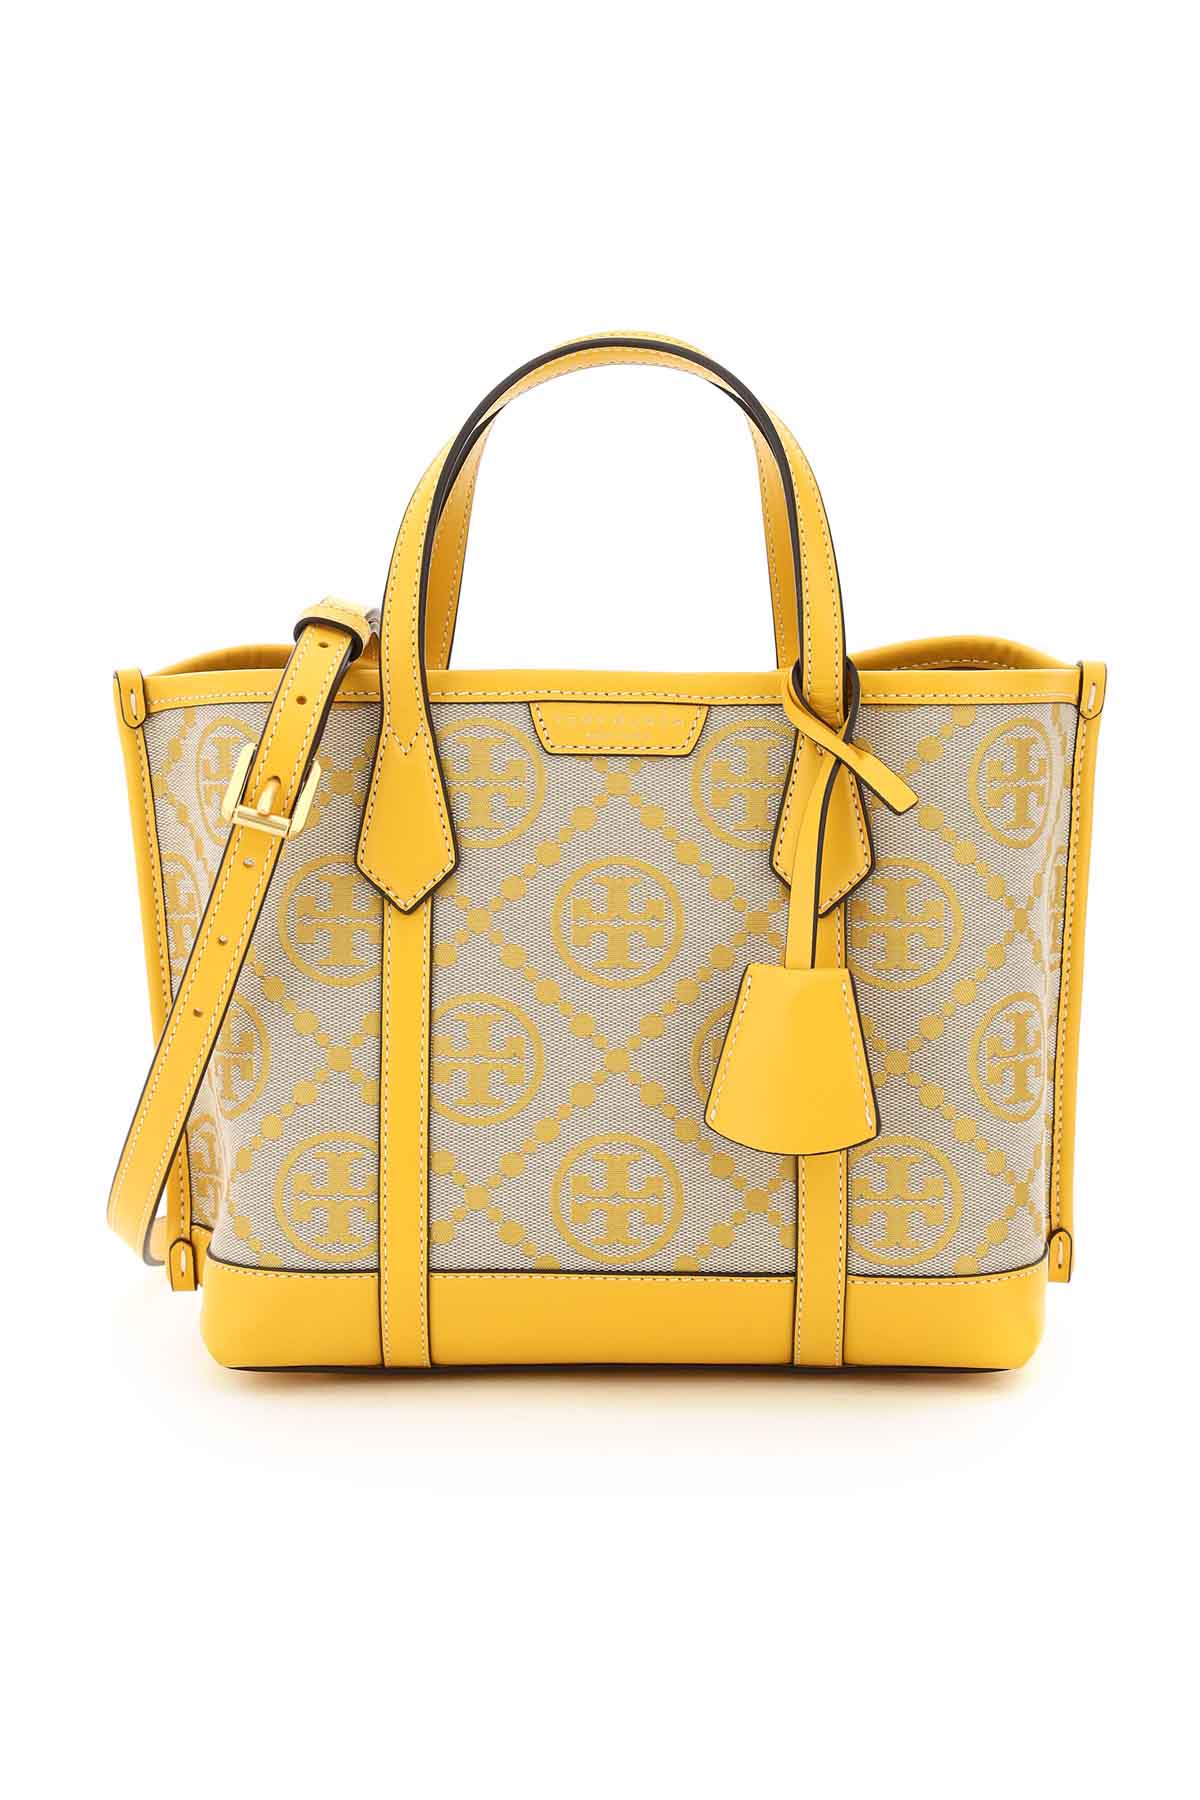 Tory Burch Perry Small Triple Compartment Tote